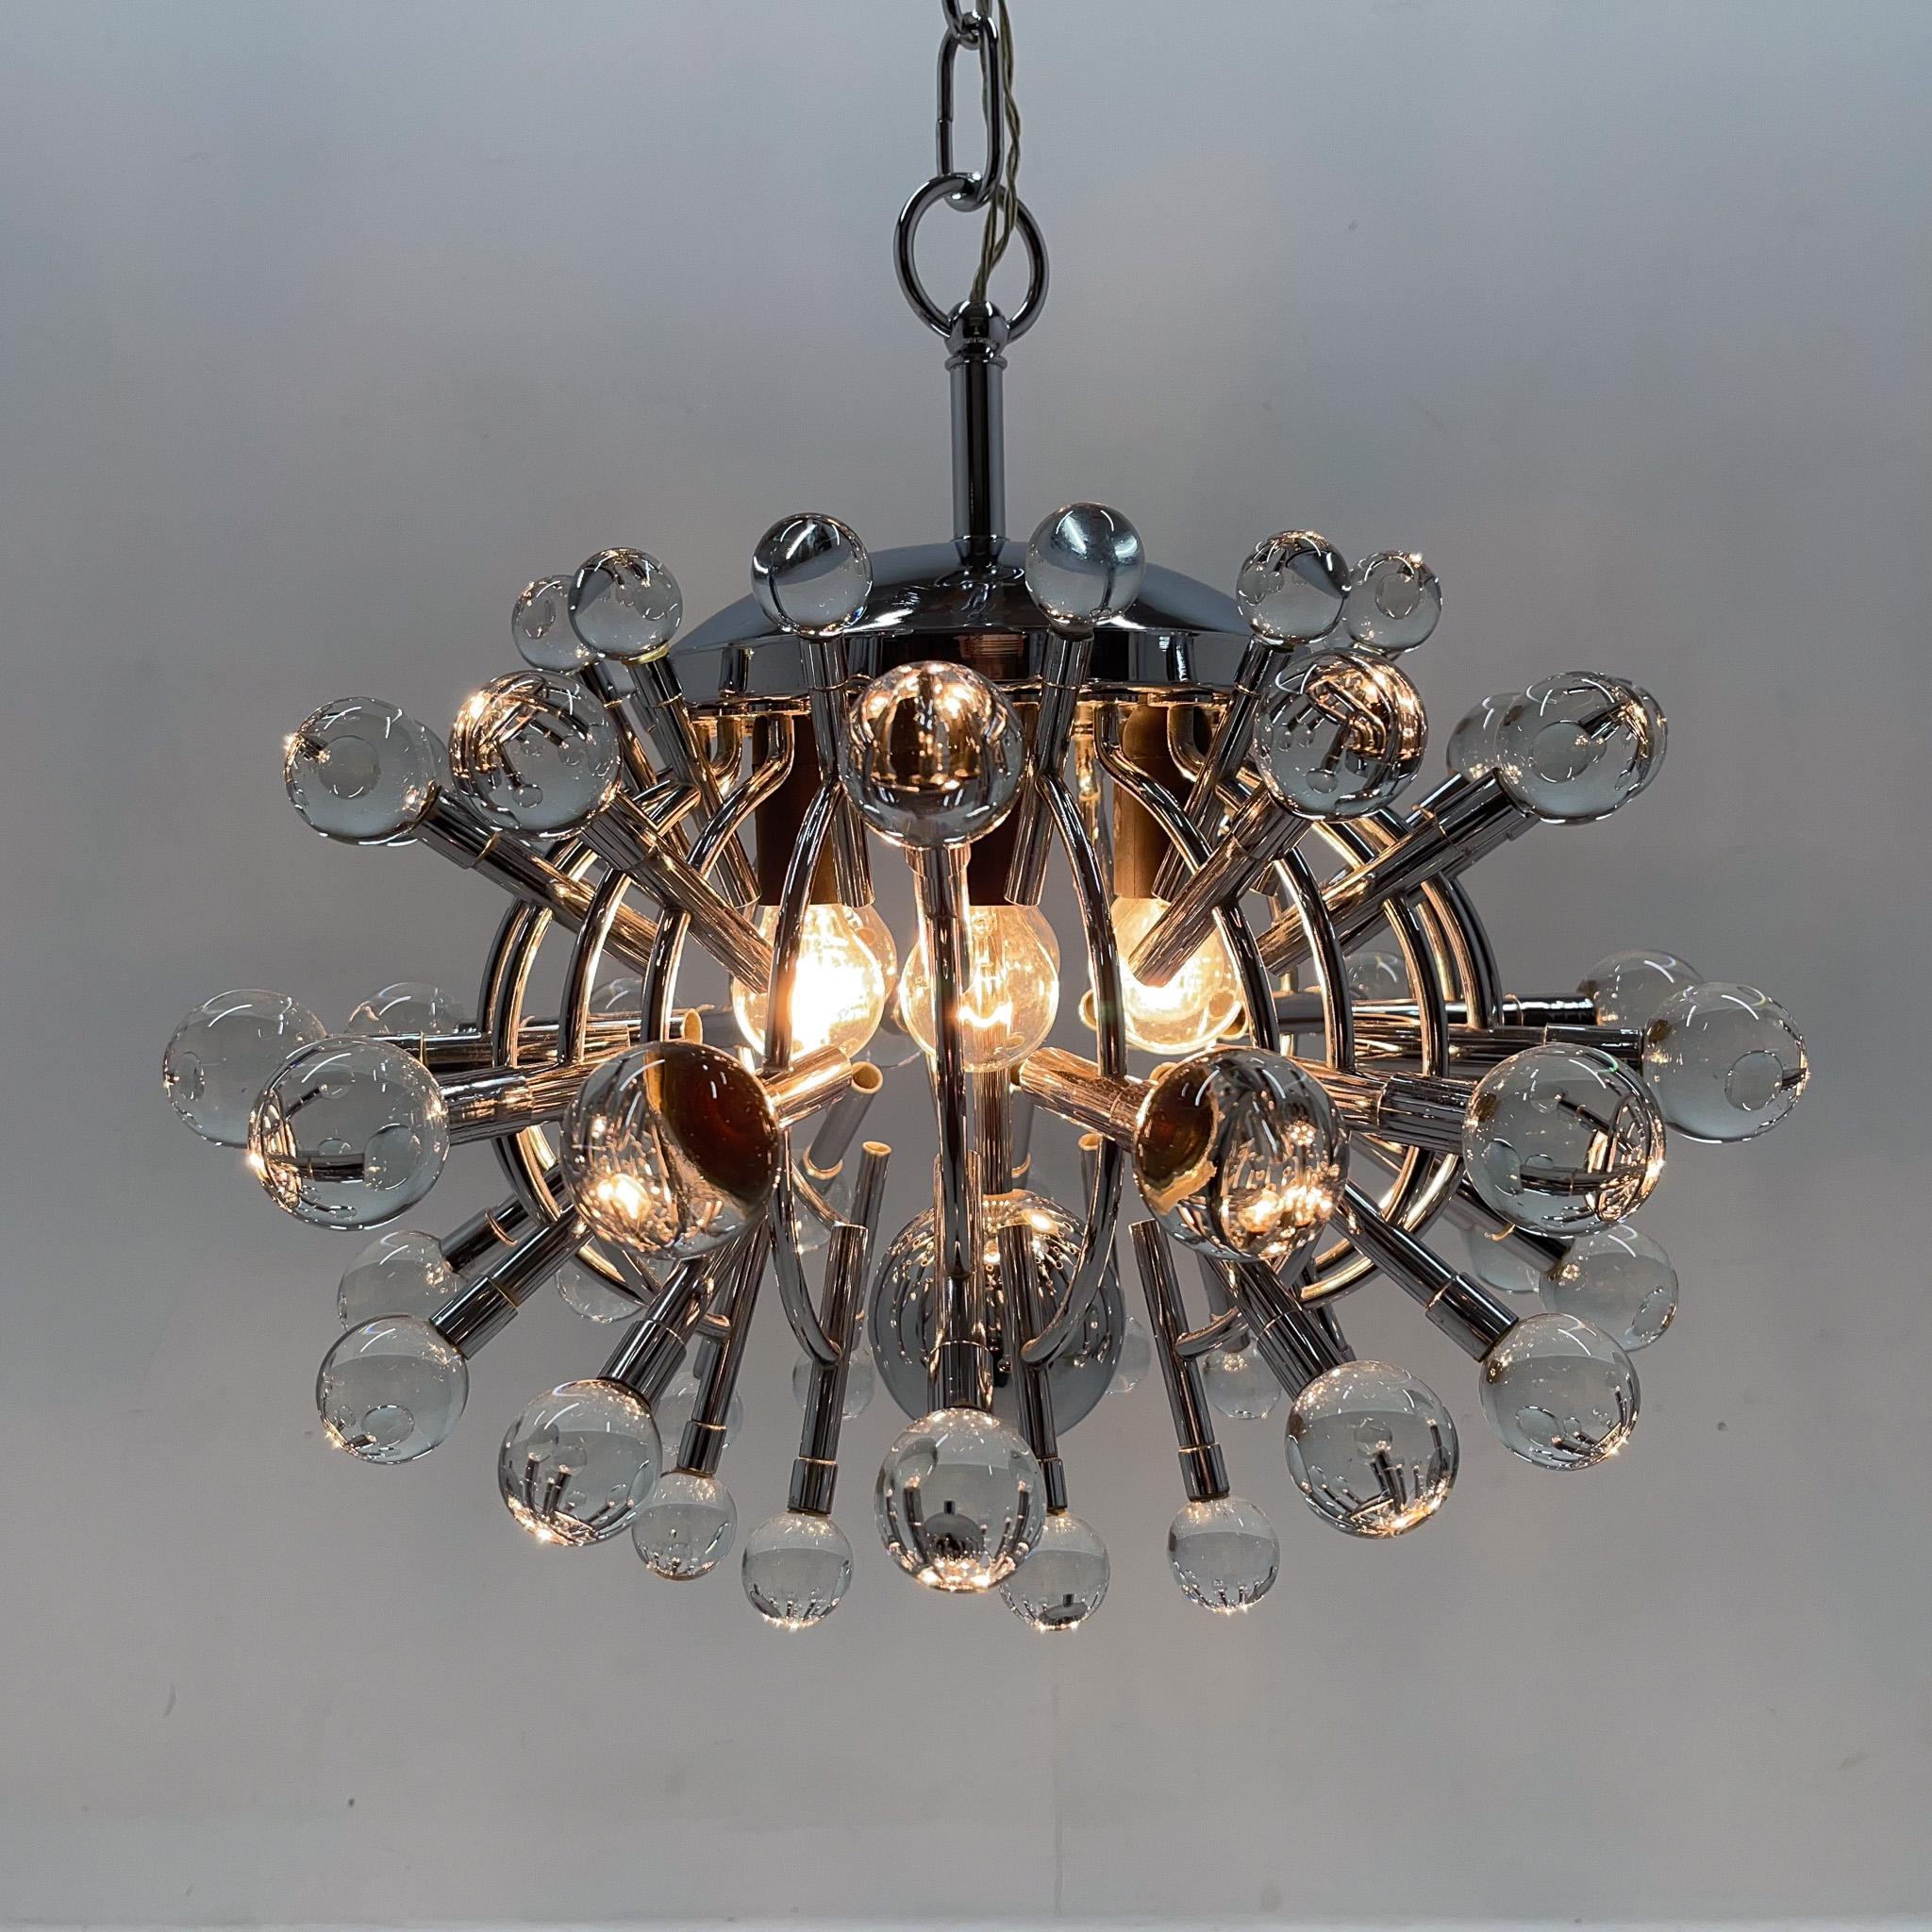 Unique Italian Space Age Chrome & Crystal Glass Chandelier, 1970s For Sale 8